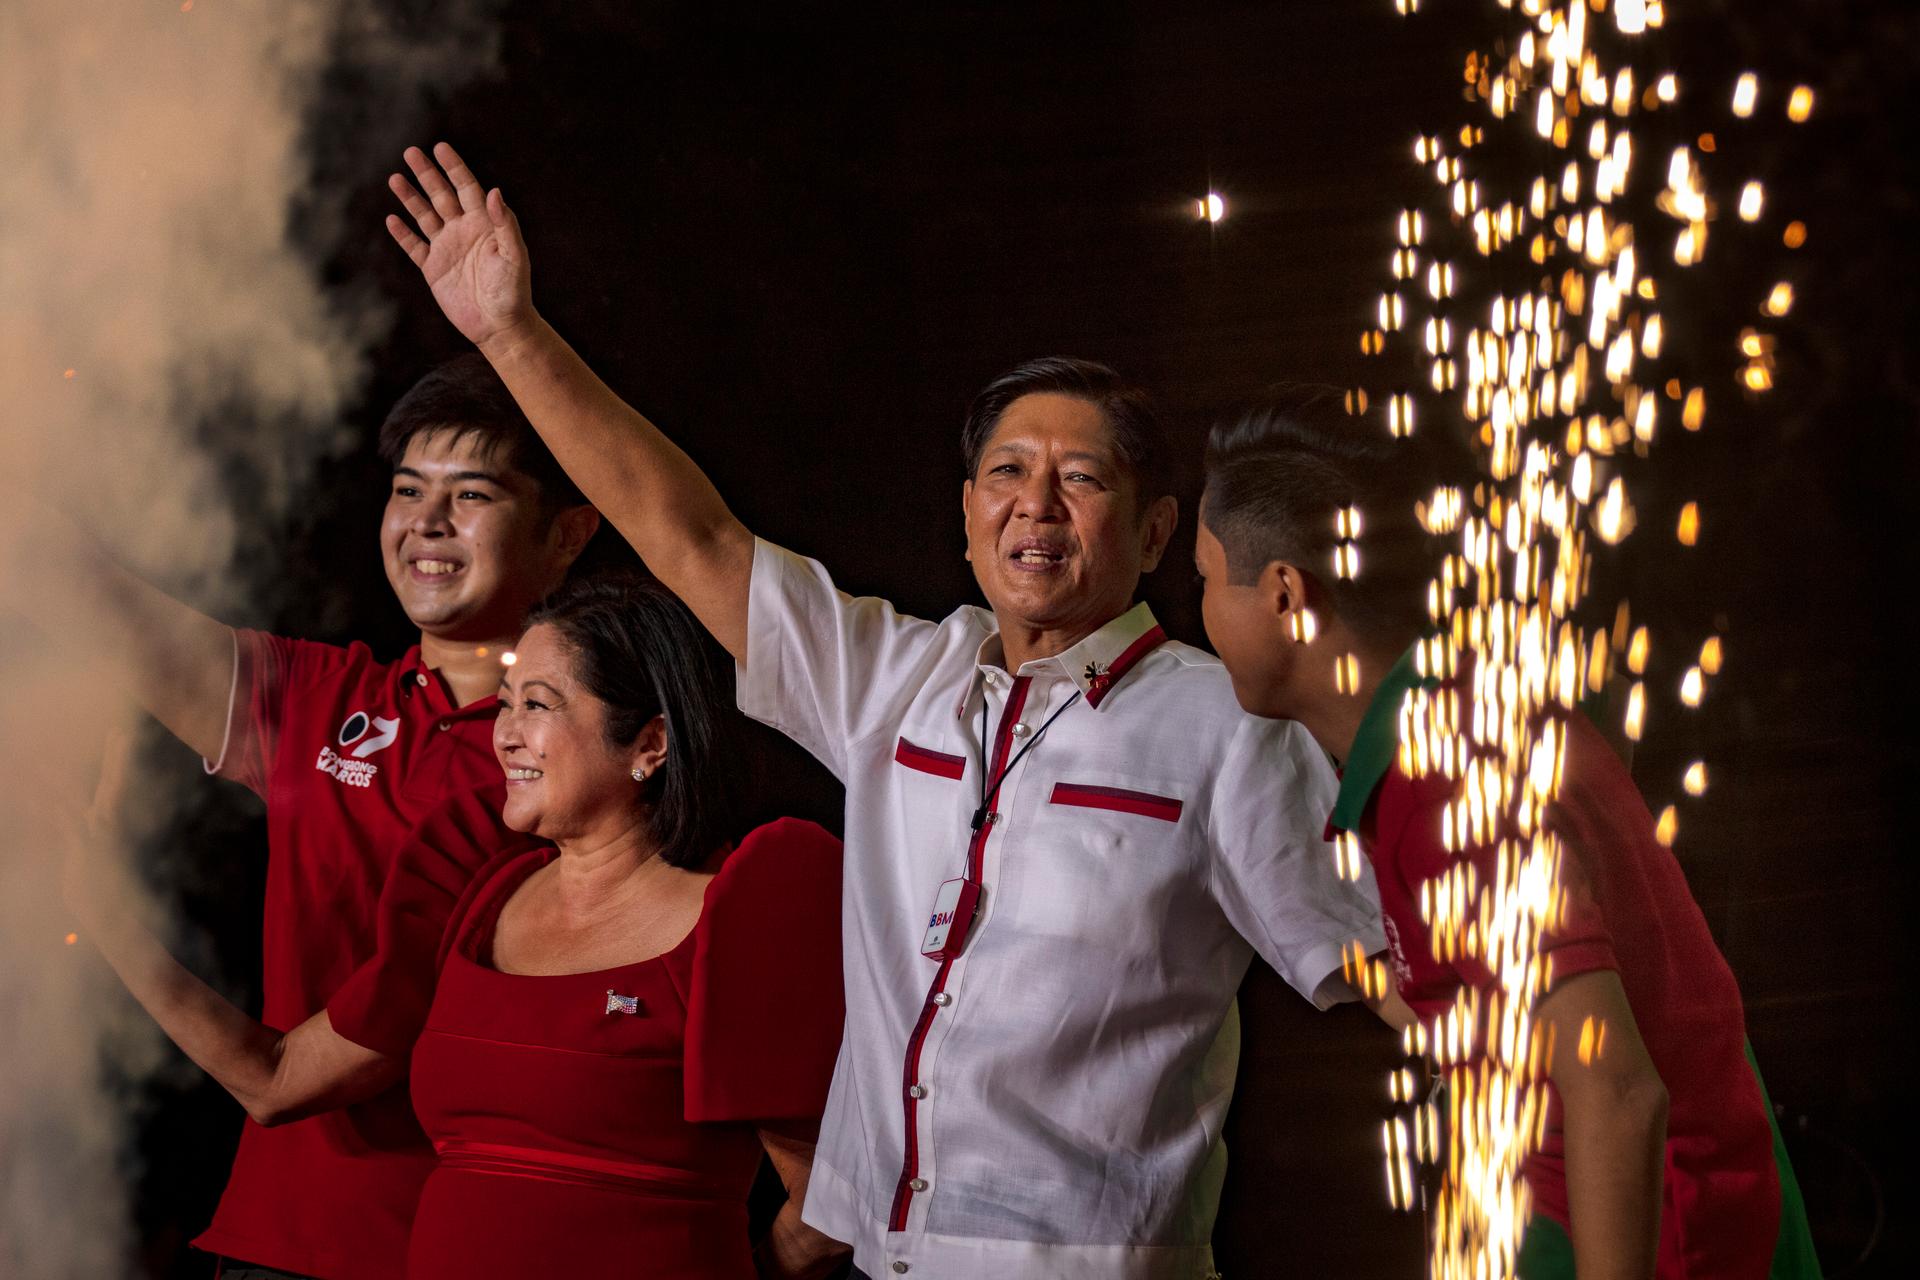 Bongbong Marcos holds up his hand in a celebratory pose as his wife and children look on